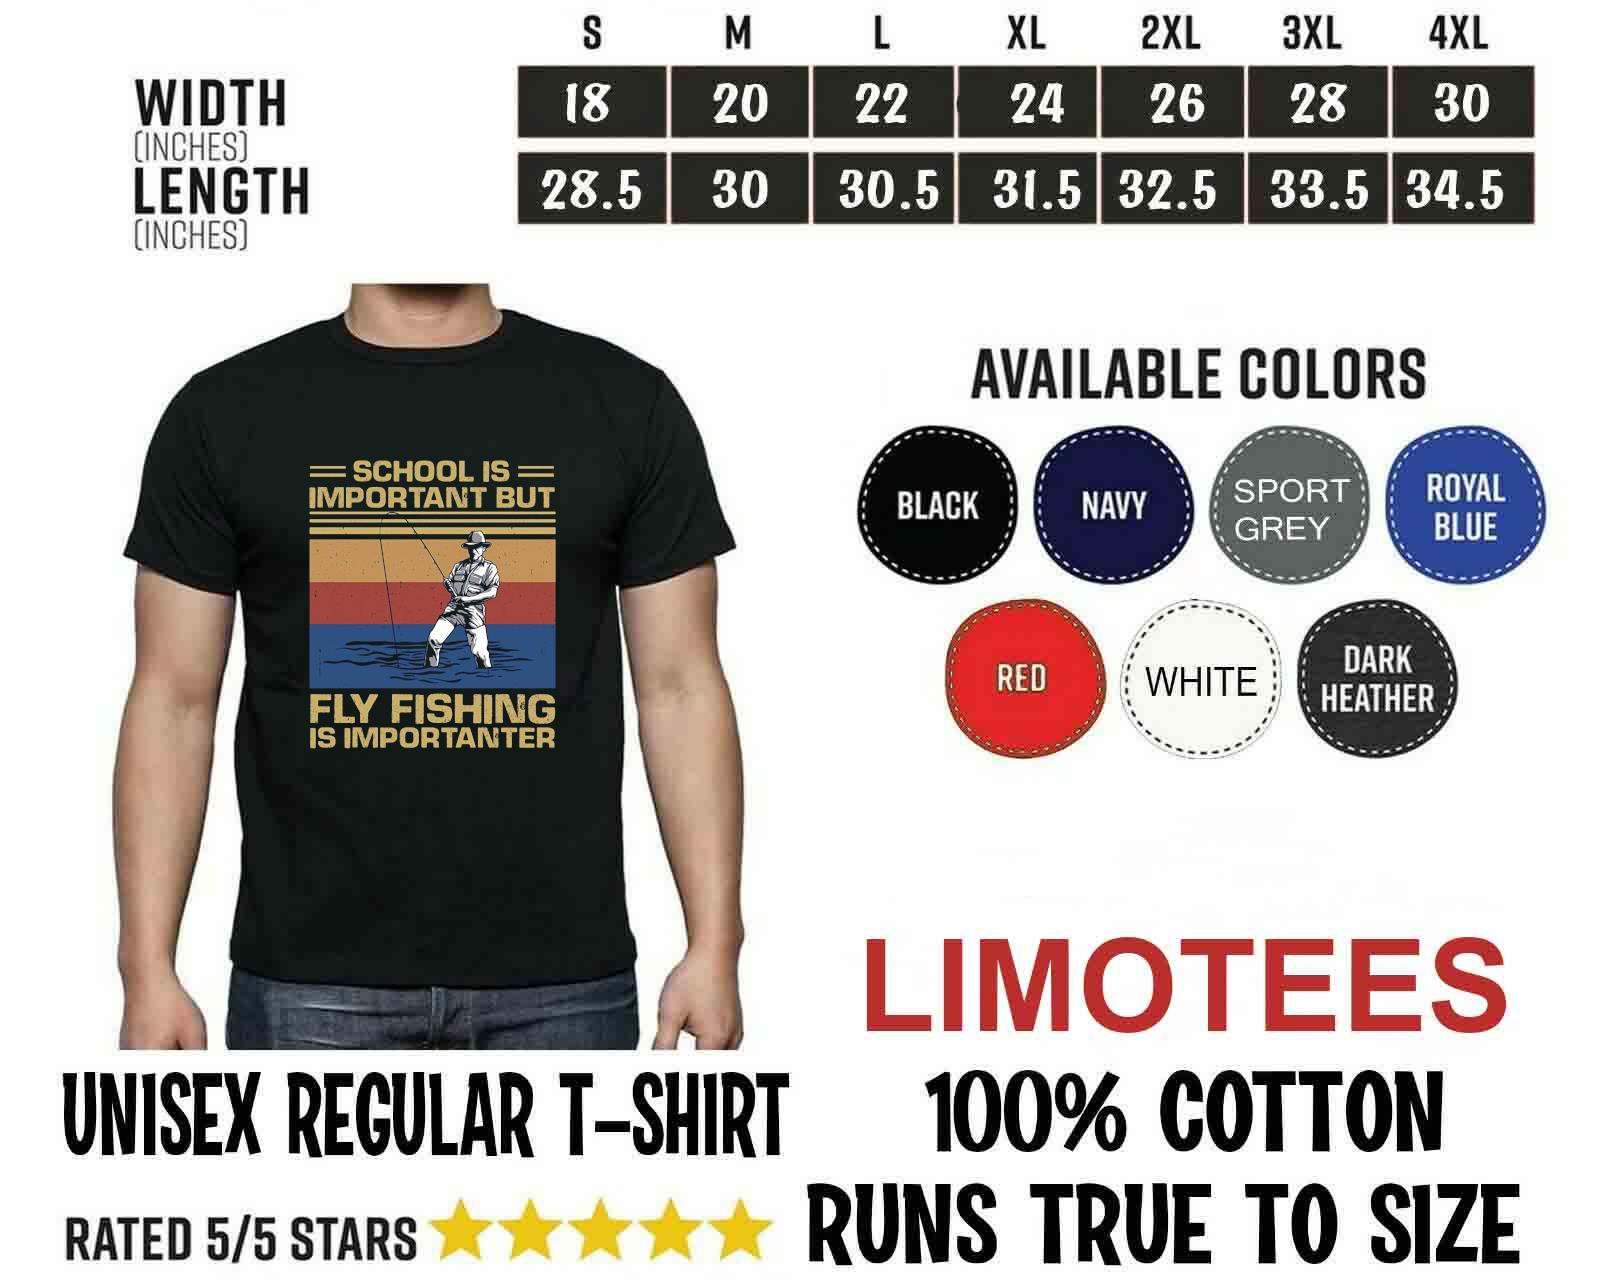 https://images.limotees.net/2022/01/school-is-important-but-fly-fishing-is-importanter-vintage-t-shirt-limotees-size-chart.jpg